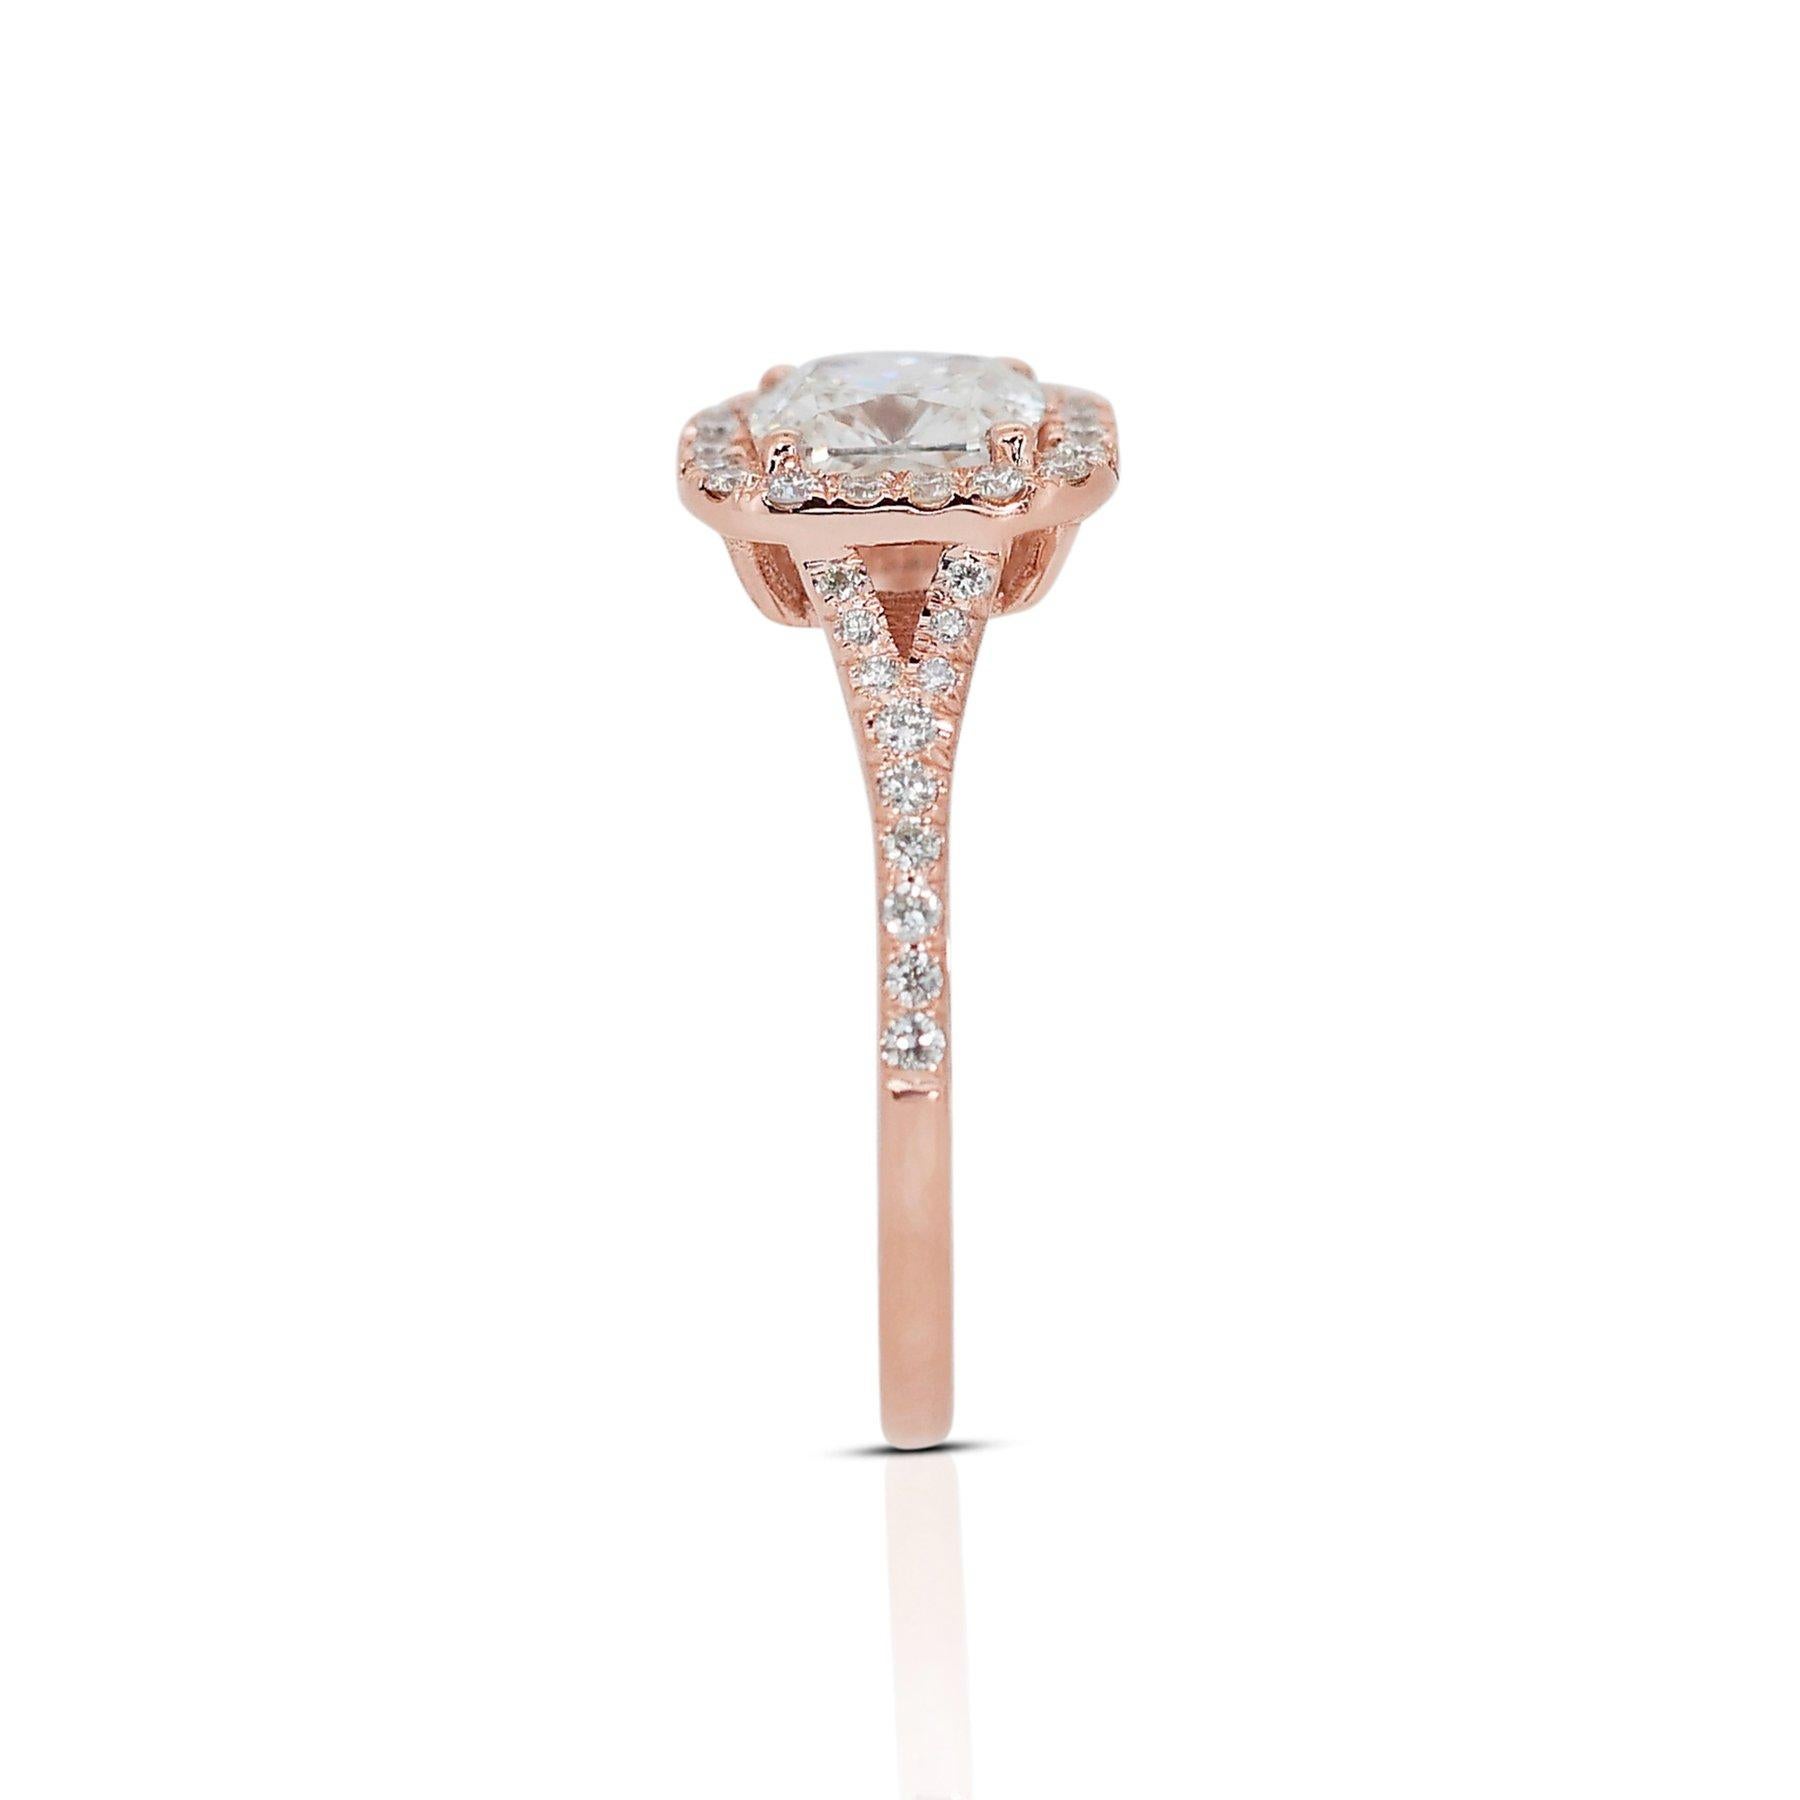 Elegant 1.28ct Diamond Halo Ring in 18k Rose Gold – GIA Certified In New Condition For Sale In רמת גן, IL